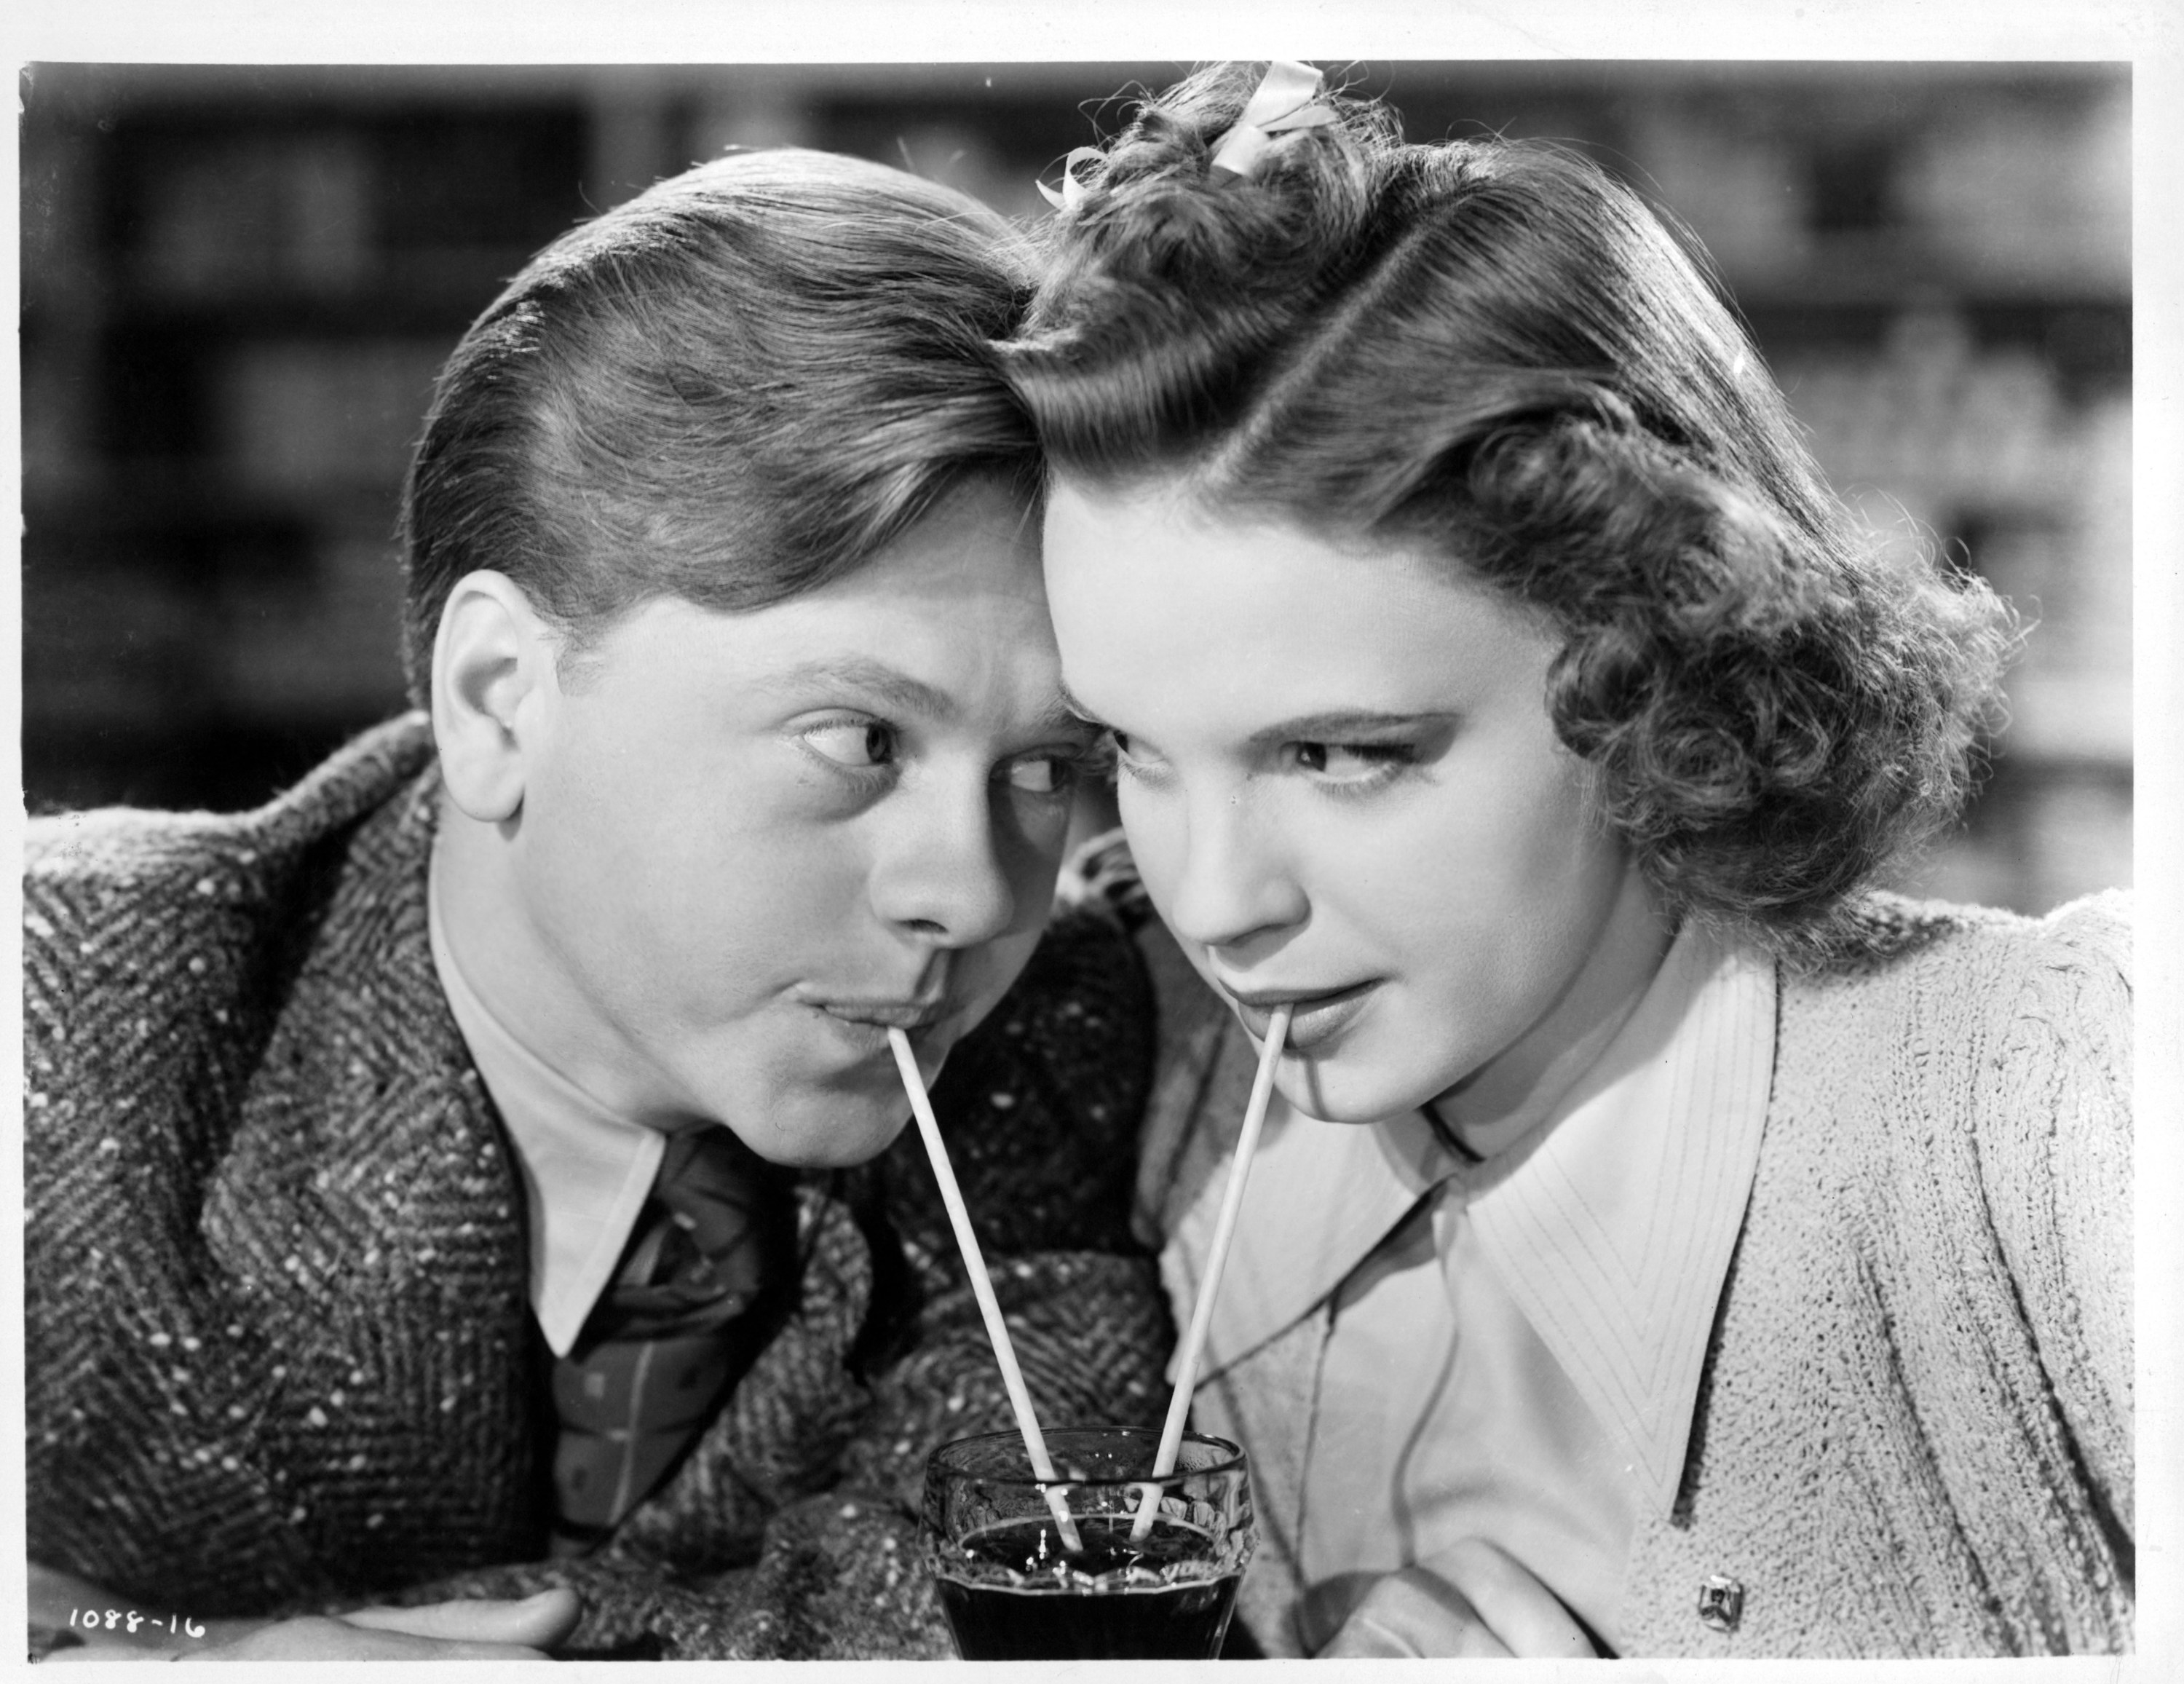 Mickey Rooney and Judy Garland sharing a soda together as they stare into one an others eyes in a scene from the film &#x27;Babes In Arms&#x27;